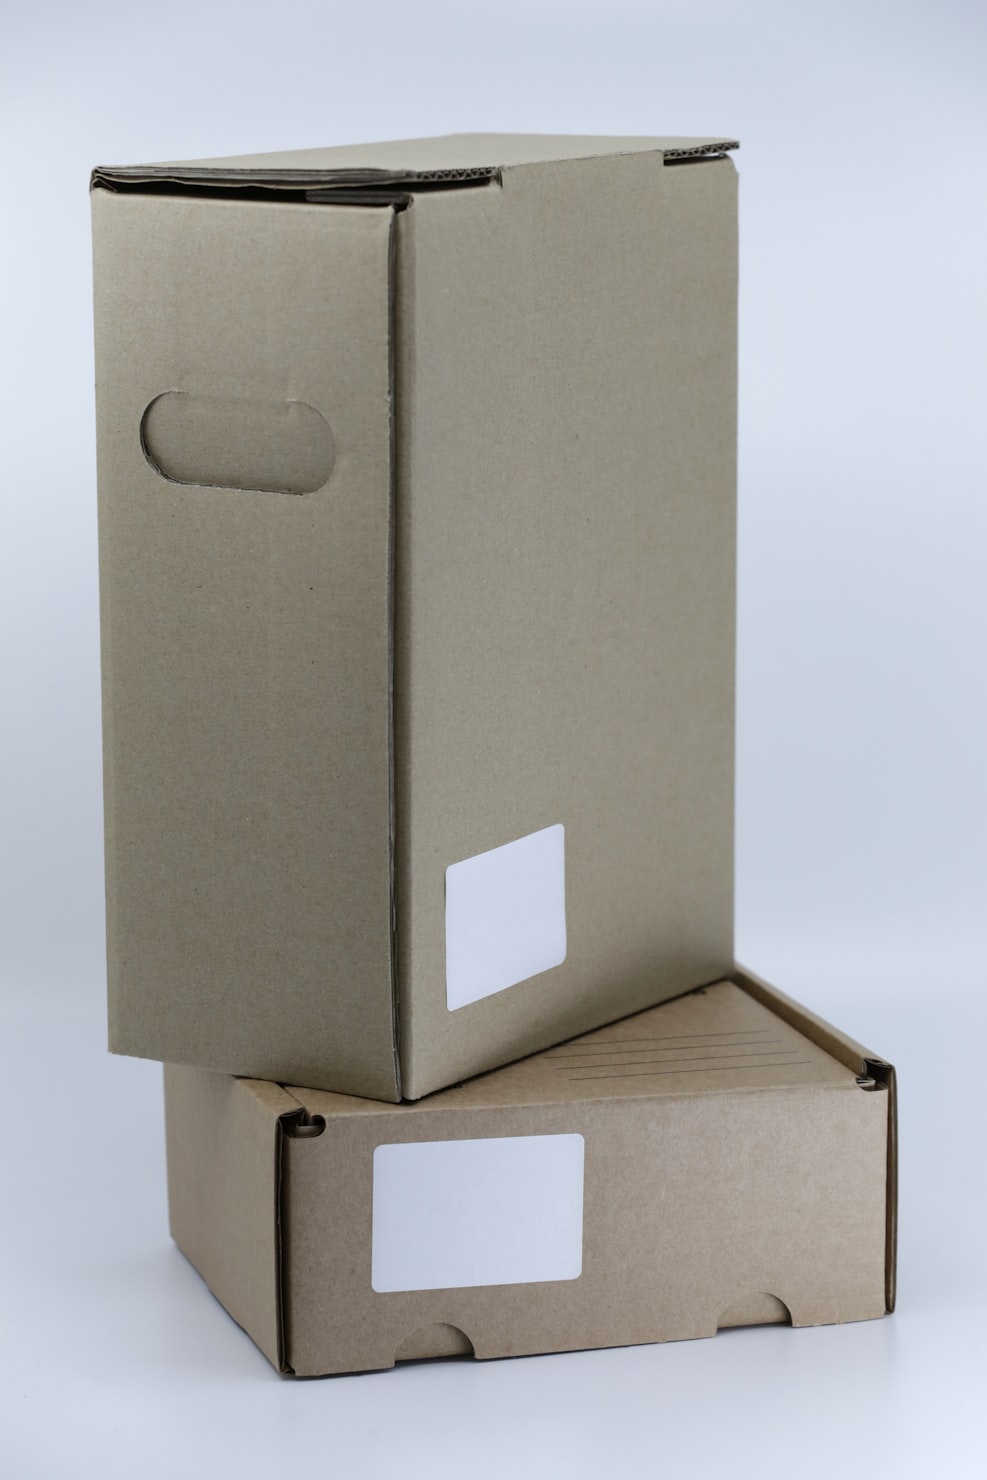 different sizes of cardboard boxes